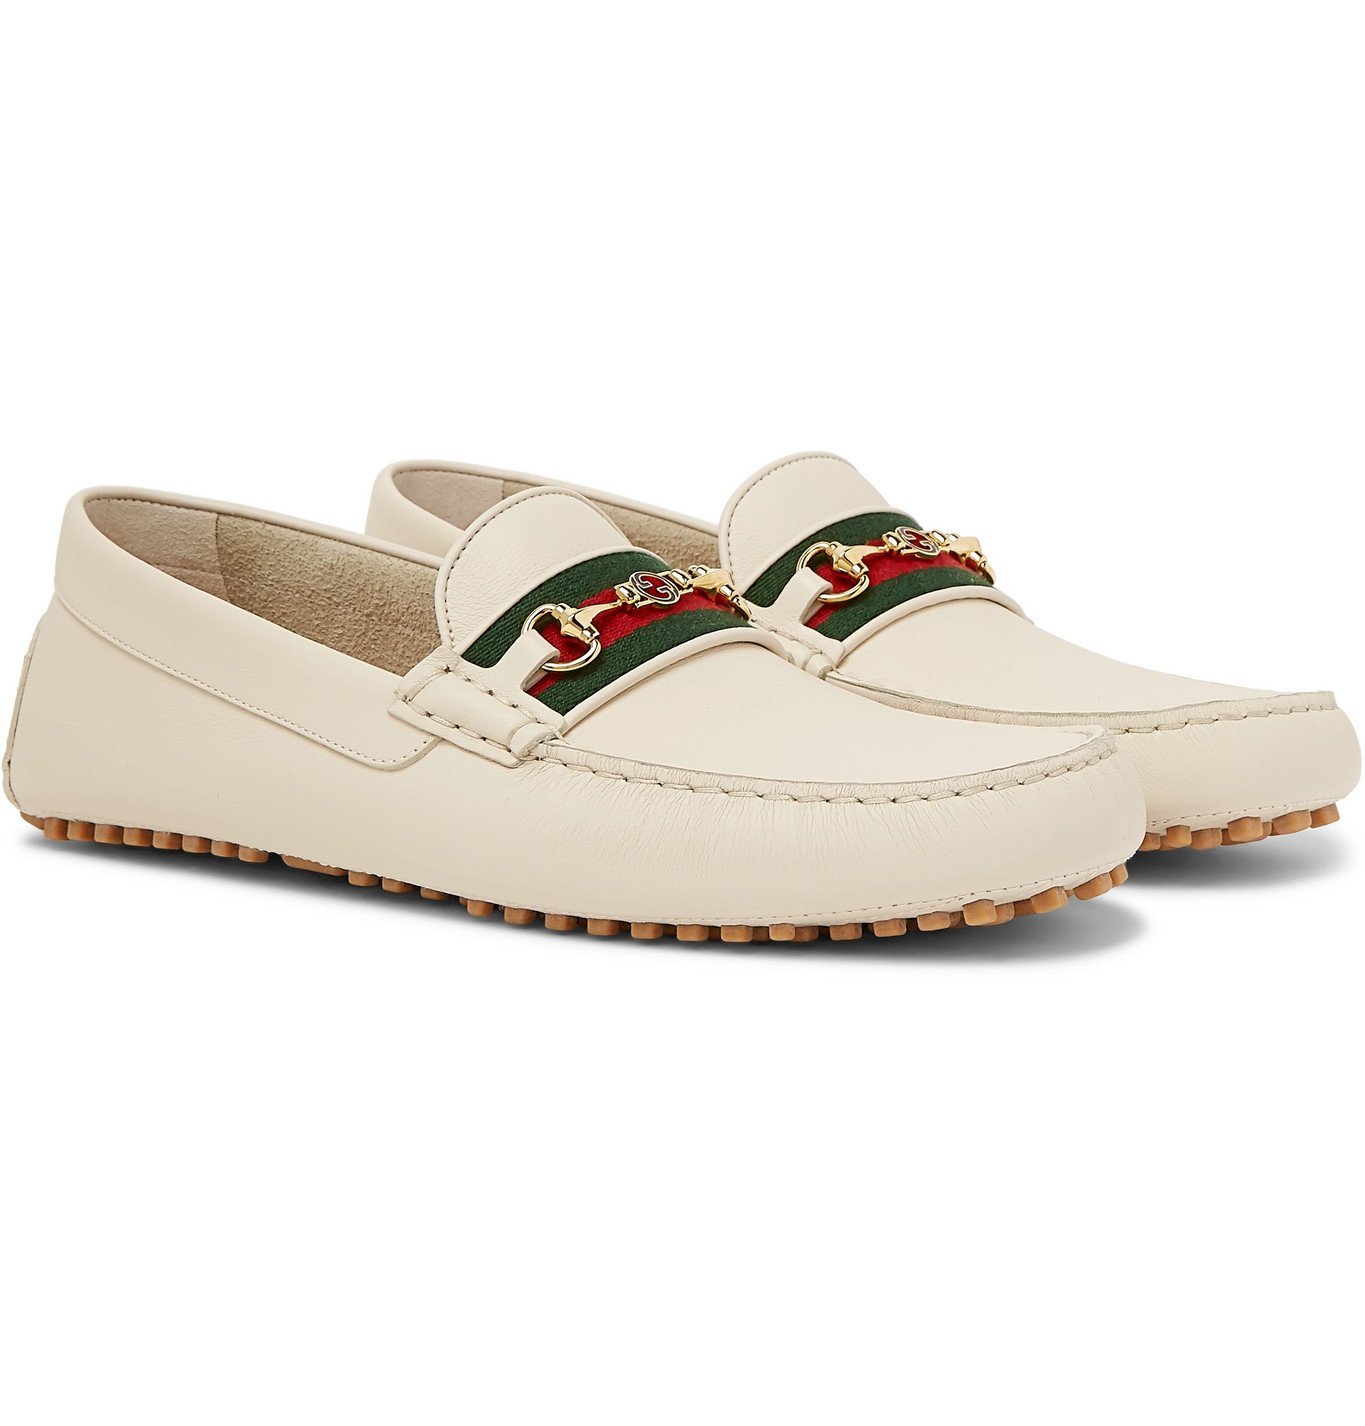 Gucci - Ayrton Webbing-Trimmed Horsebit Leather Driving Shoes - White Gucci